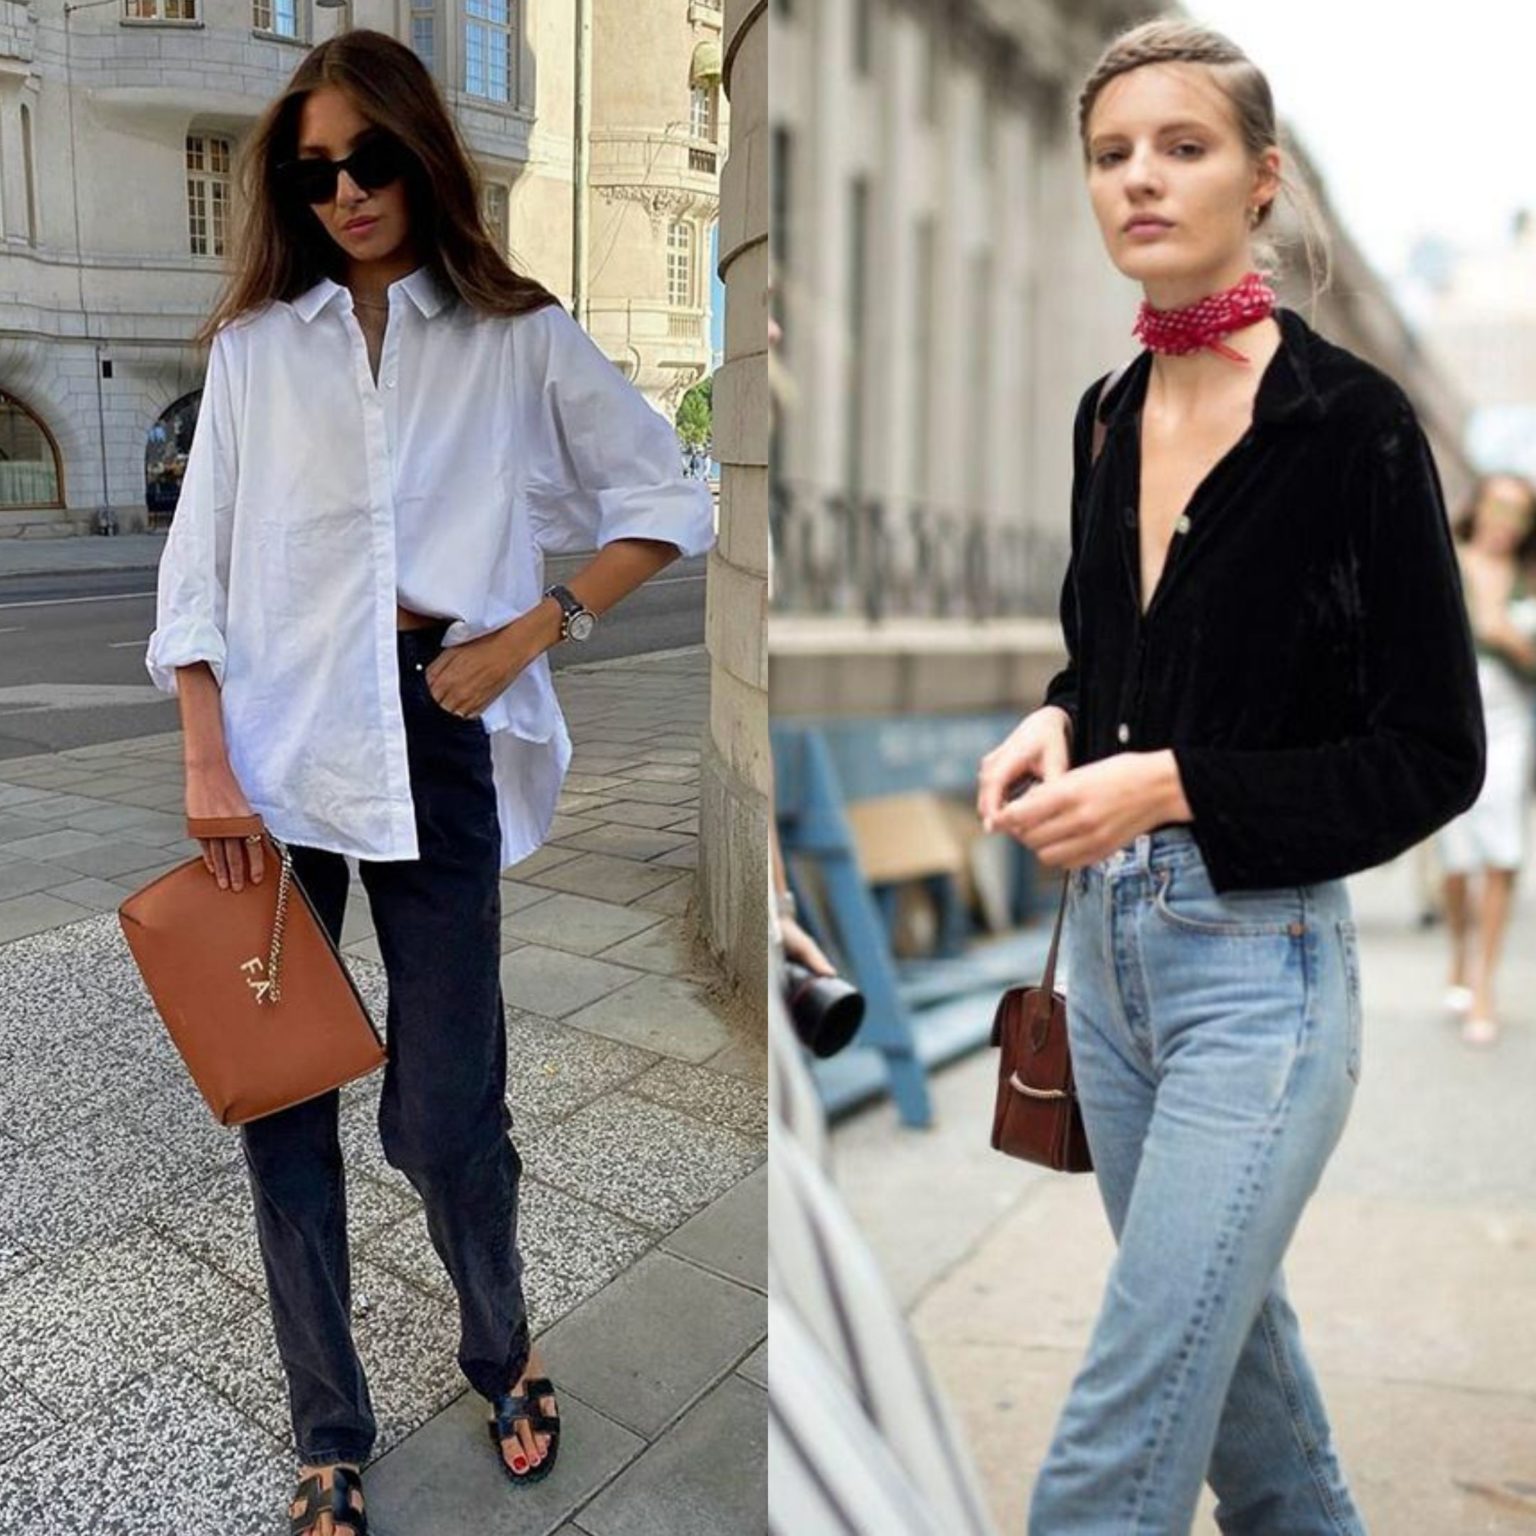 French Chic: 8 Fashion Tips From French Women - Your Classy Look